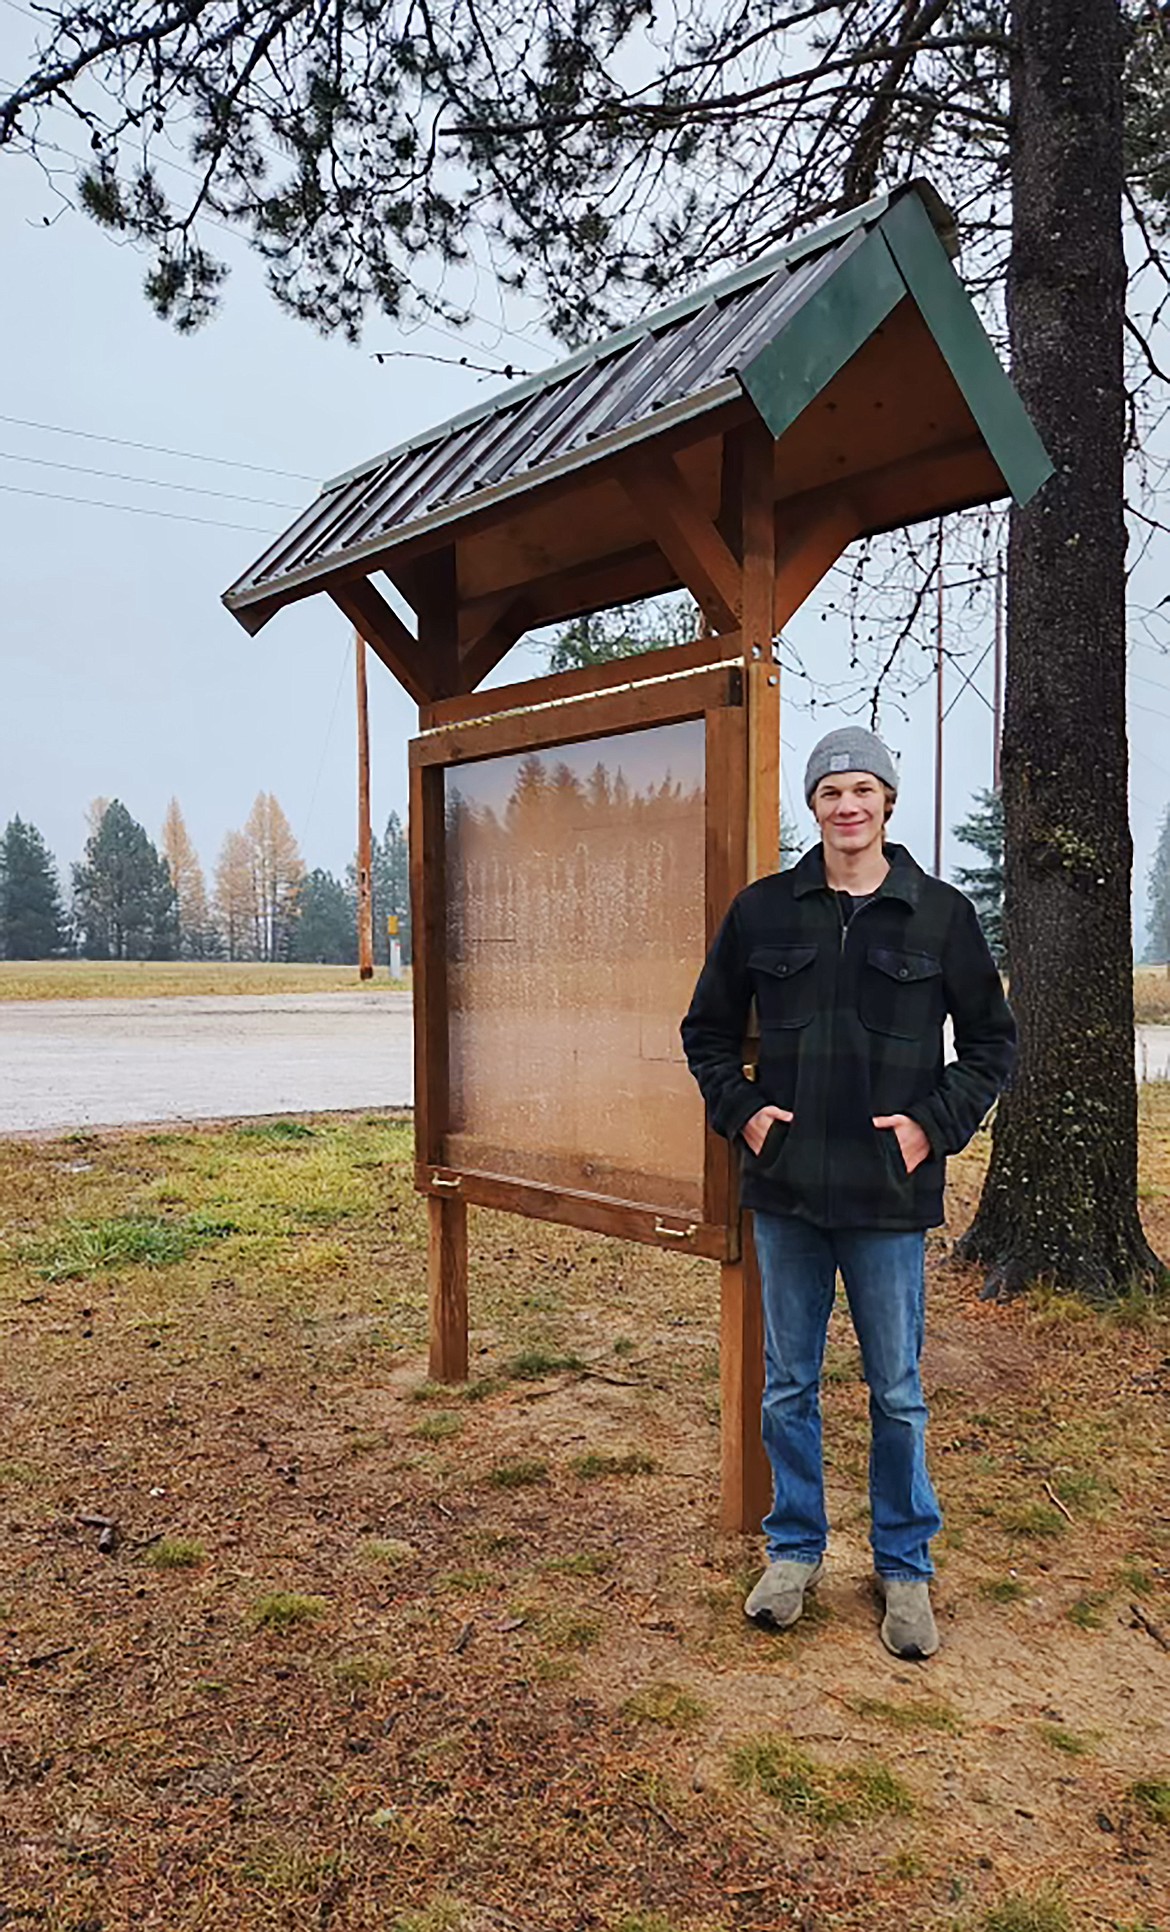 Ryan Doko stands by a community bulletin board by an old schoolhouse near his Sandpoint area home. Creation of the weather-friendly bulletin board allows community members to stay up-to-date with what is going on — and with each other, Doko said of why he picked it for an Eagle Scout project.